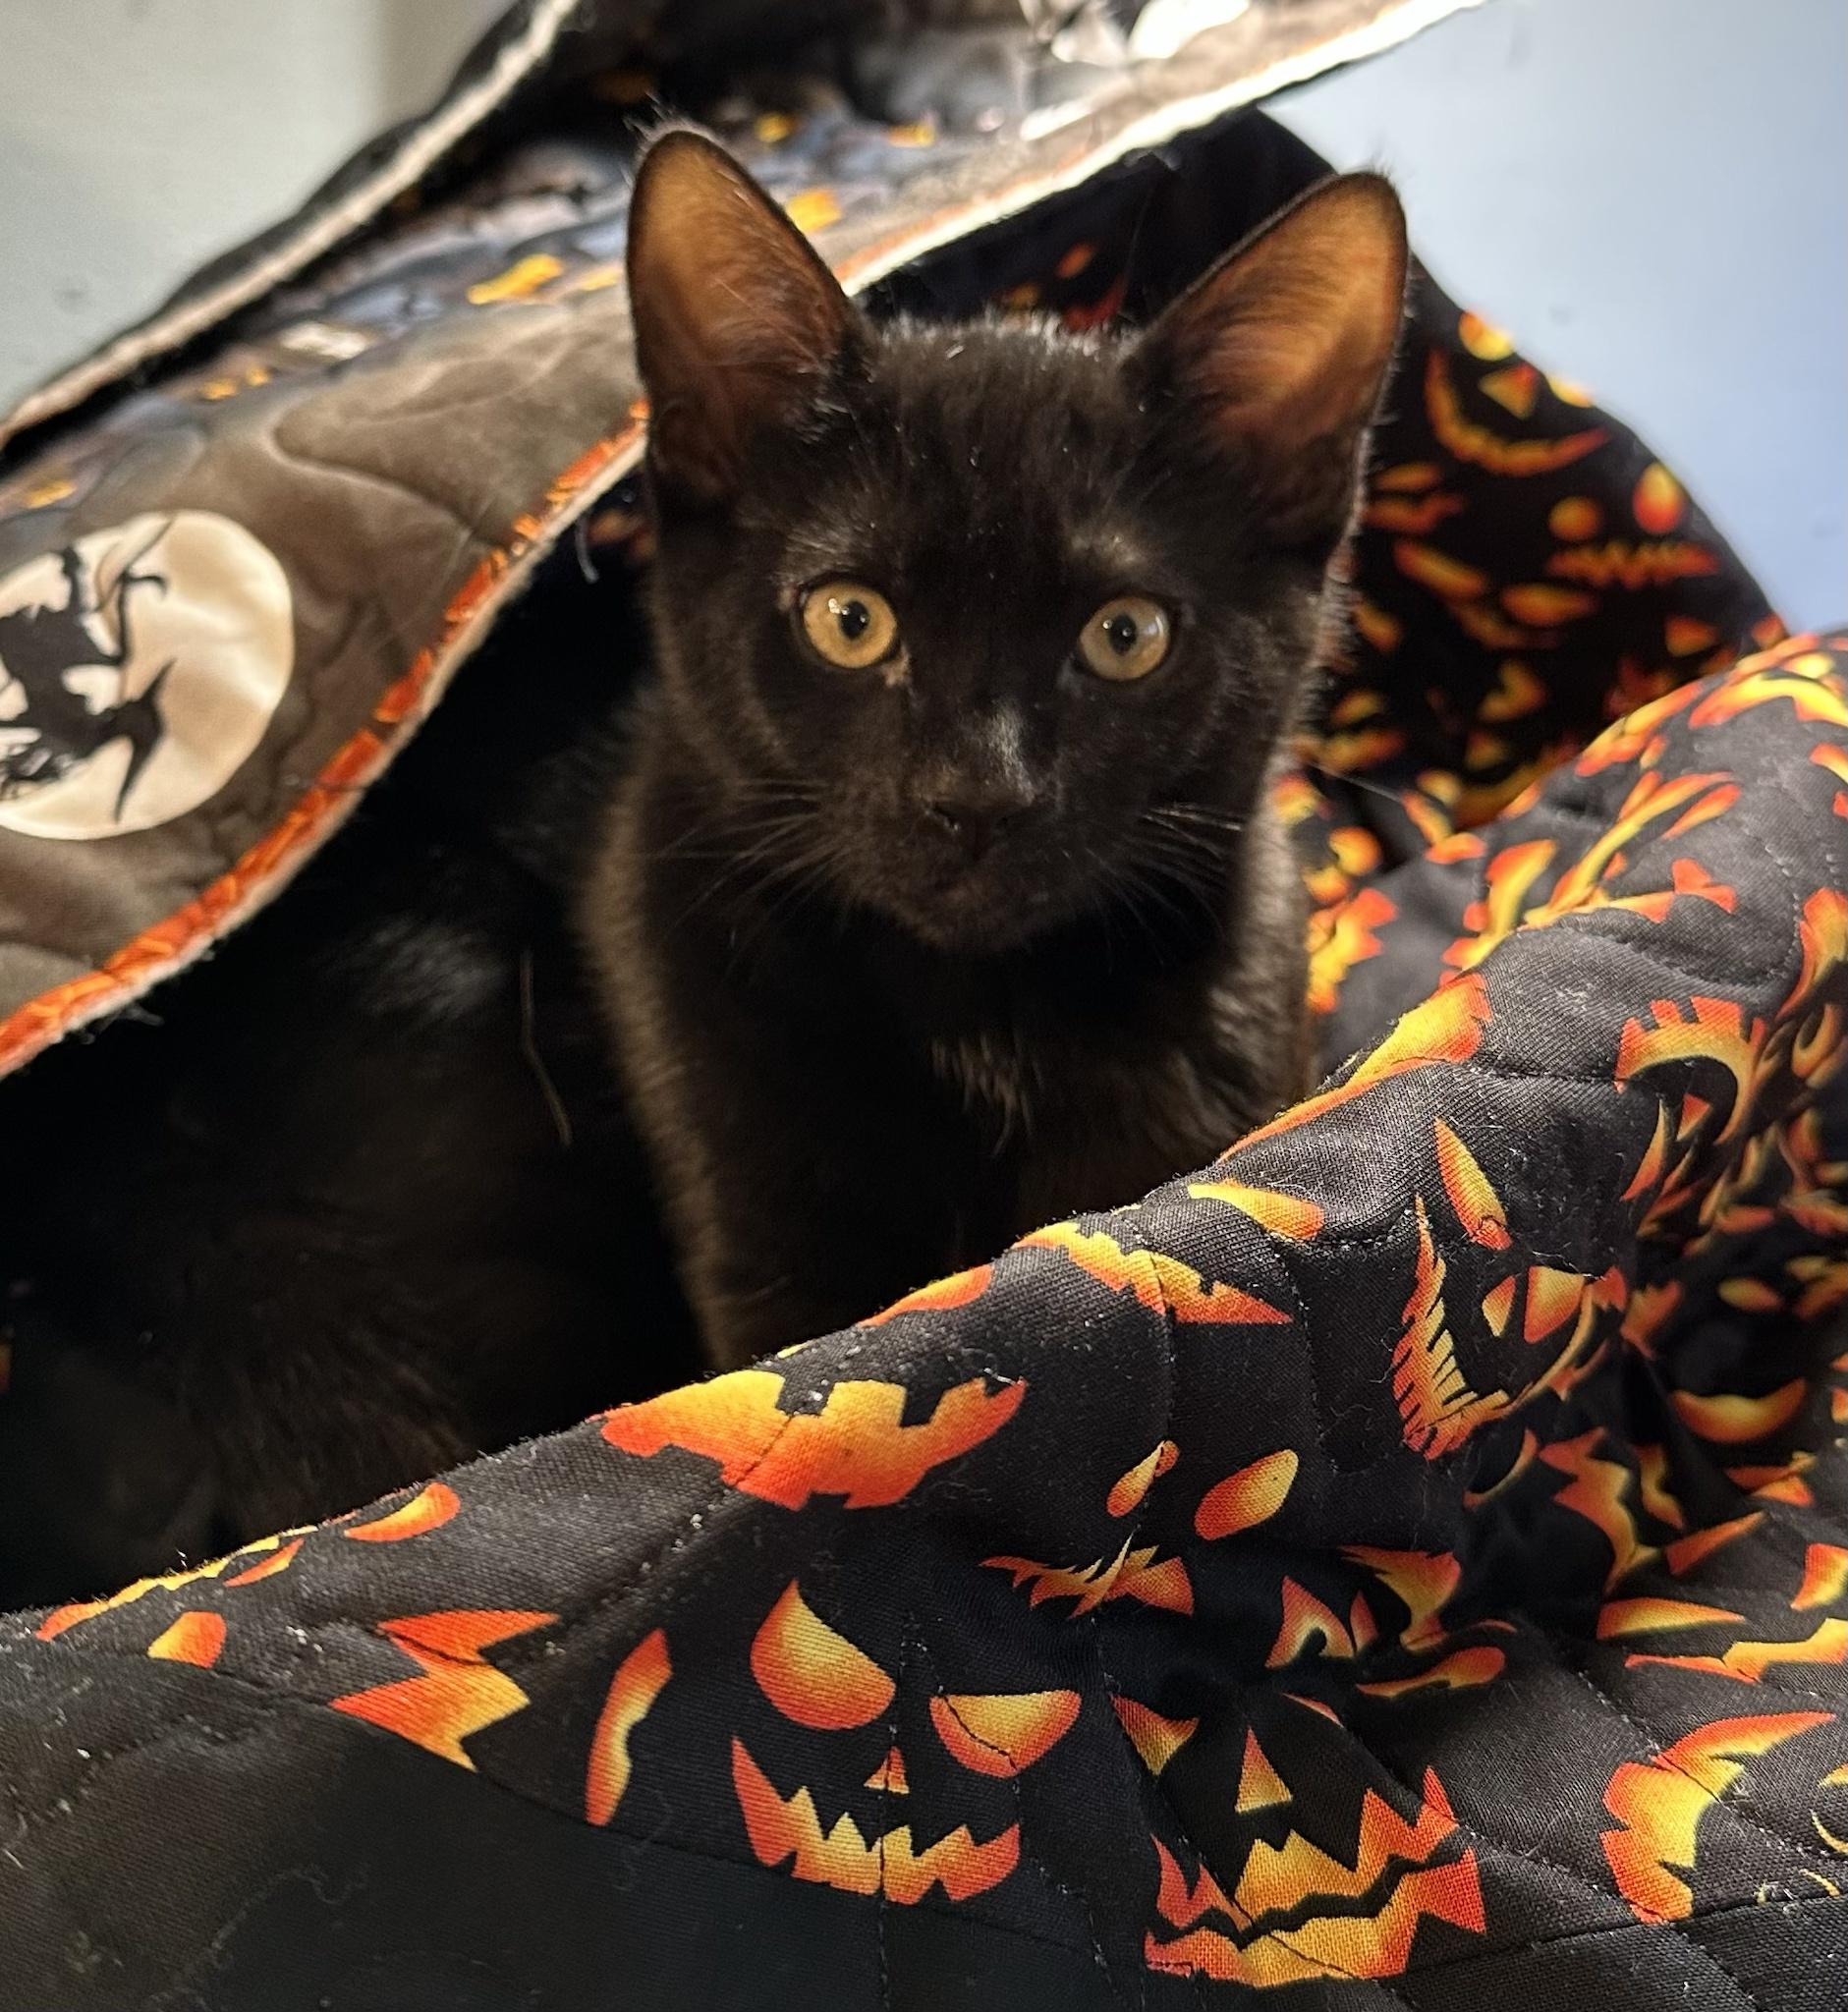 His first Halloween.